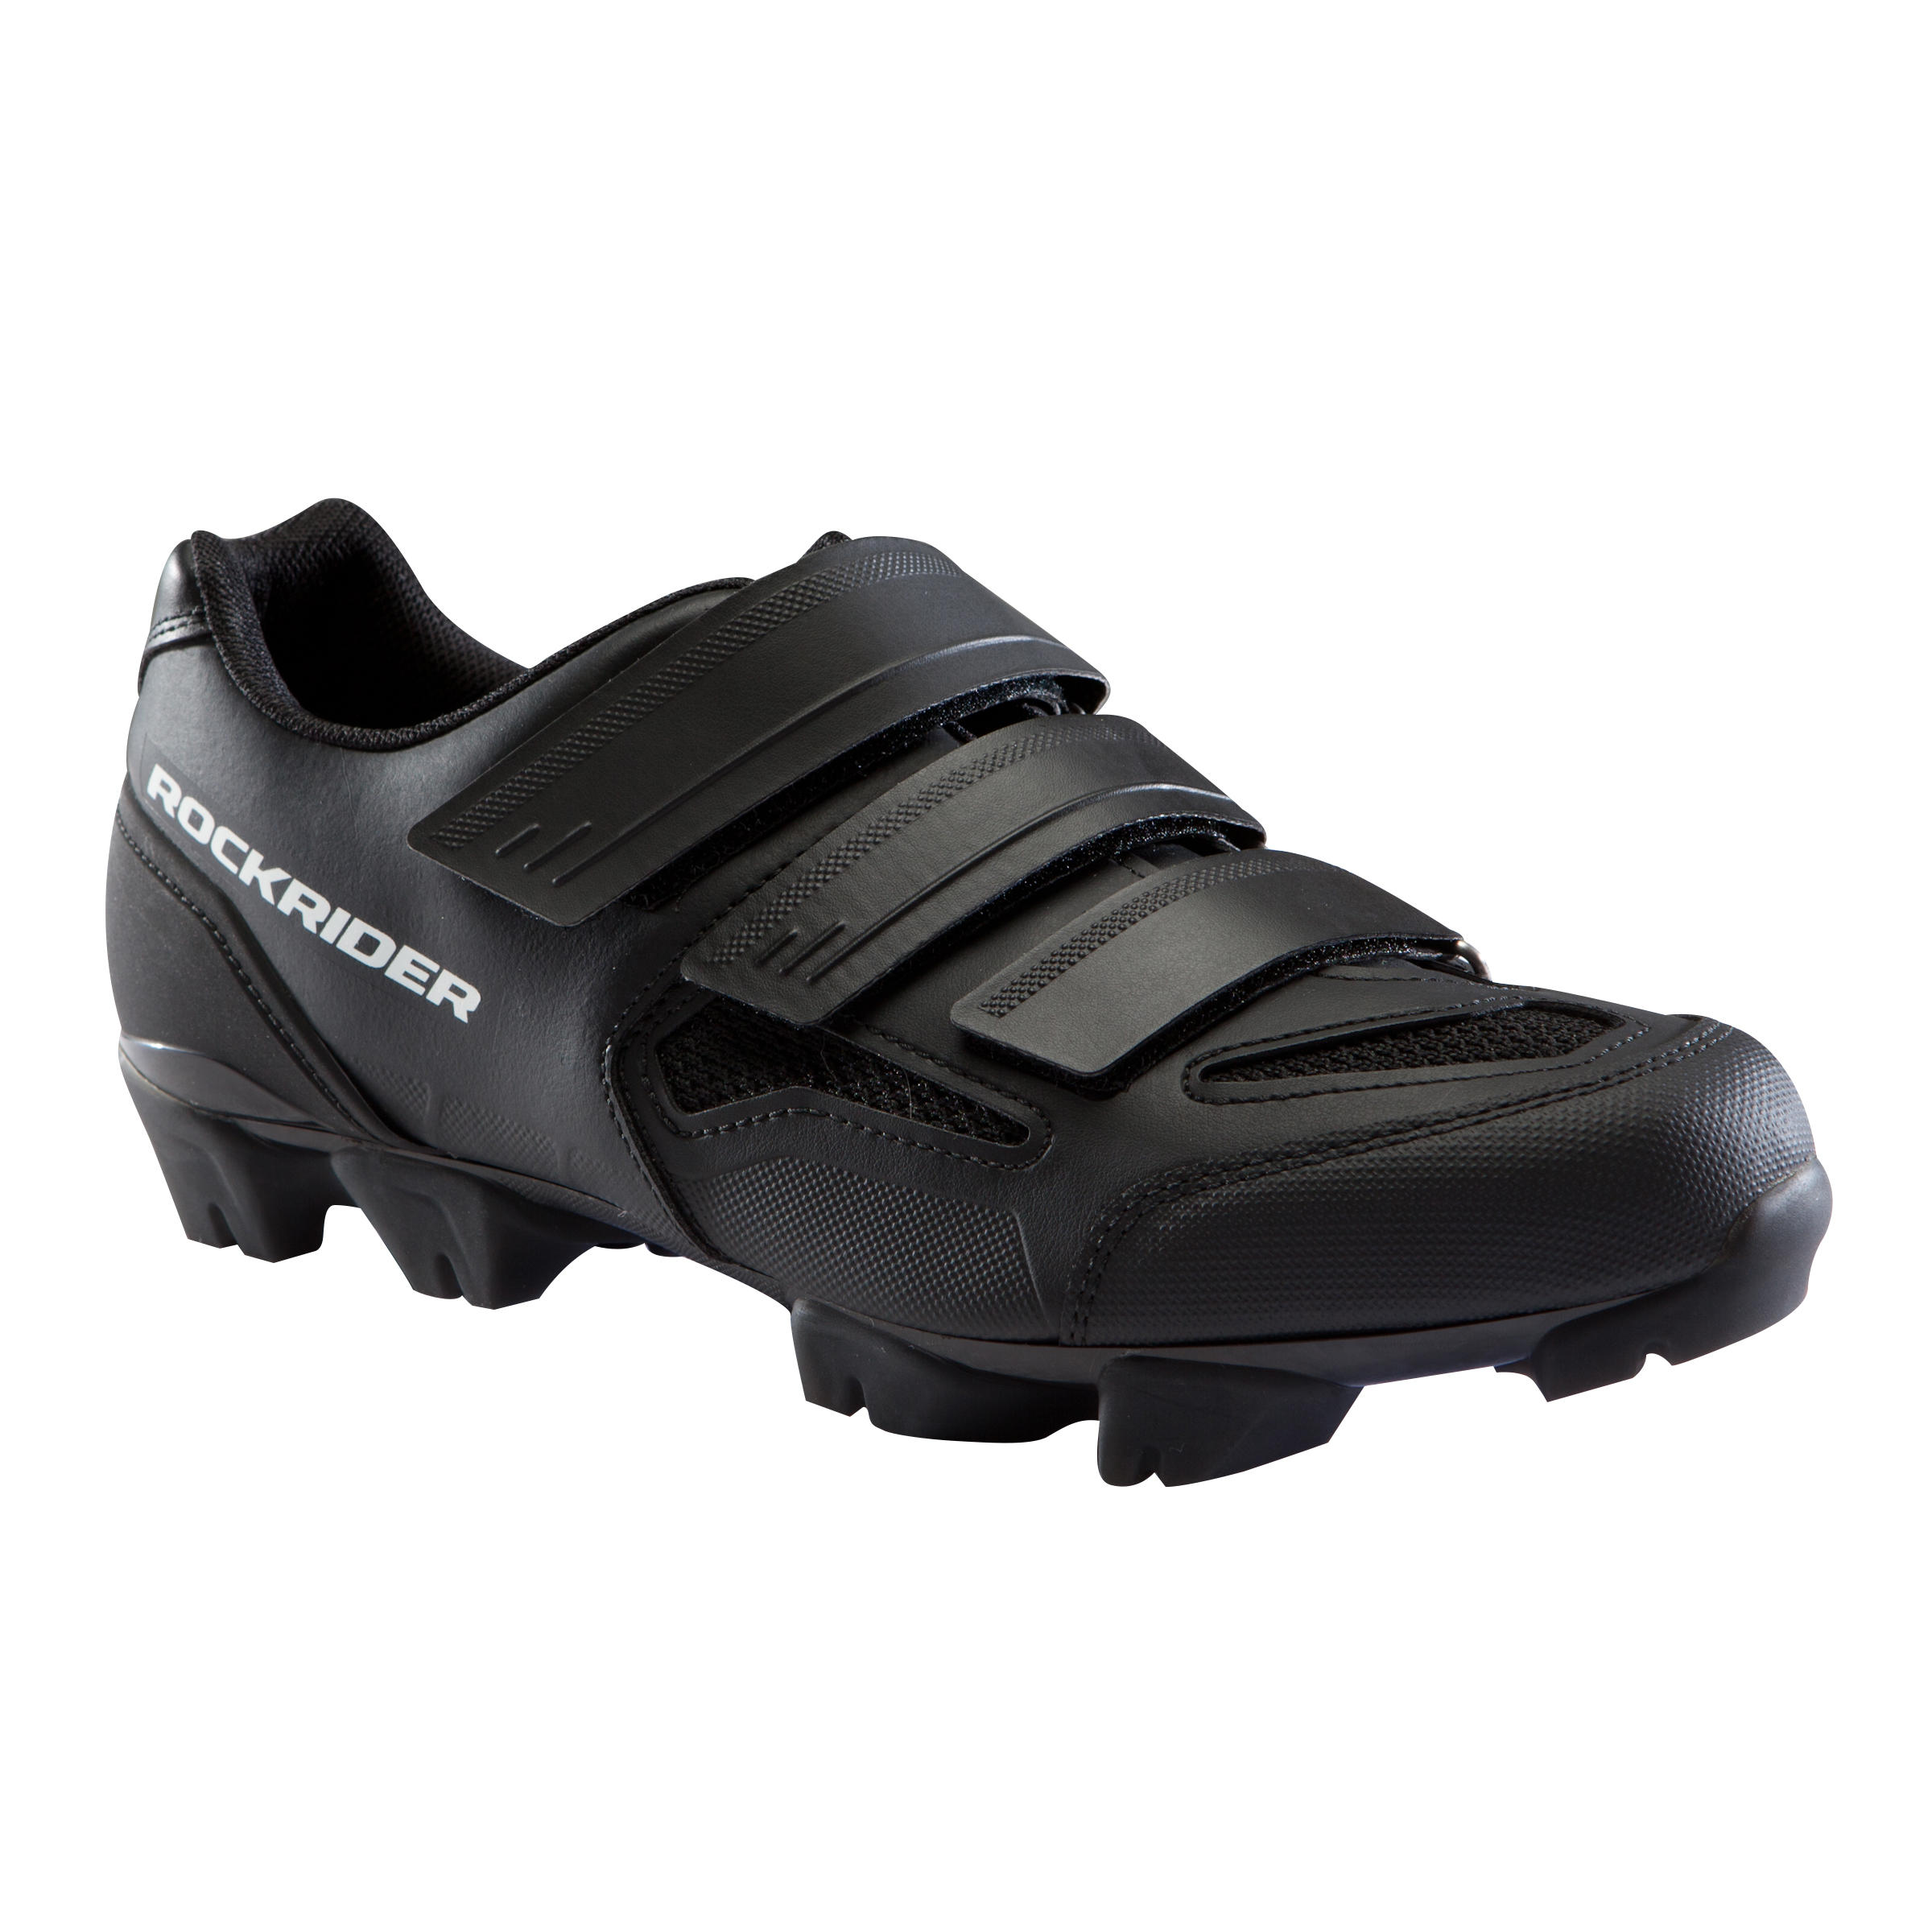 decathlon road cycling shoes